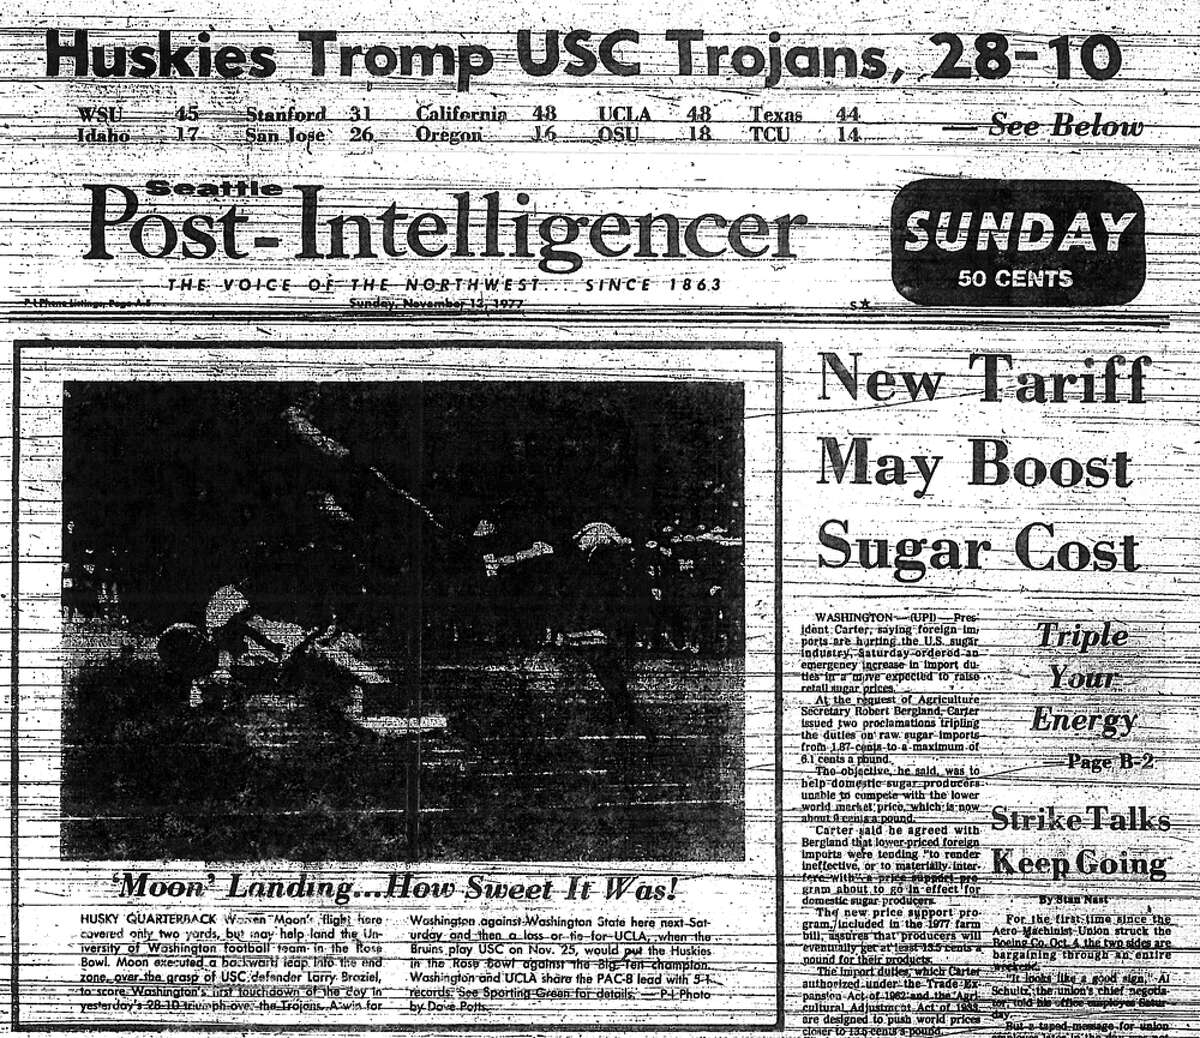 No. 9, Nov. 12, 1977 – Washington 28, USC 10. The first of many memorable Husky wins over USC in the Don James era. After starting the season 1-3, the Huskies finished 6-1 in Pac-8 play to clinch the first Rose Bowl appearance of James’ career. This win over USC was perhaps the defining moment of that season, and marked the beginning of UW’s perennial competition with the Trojans for the conference crown.